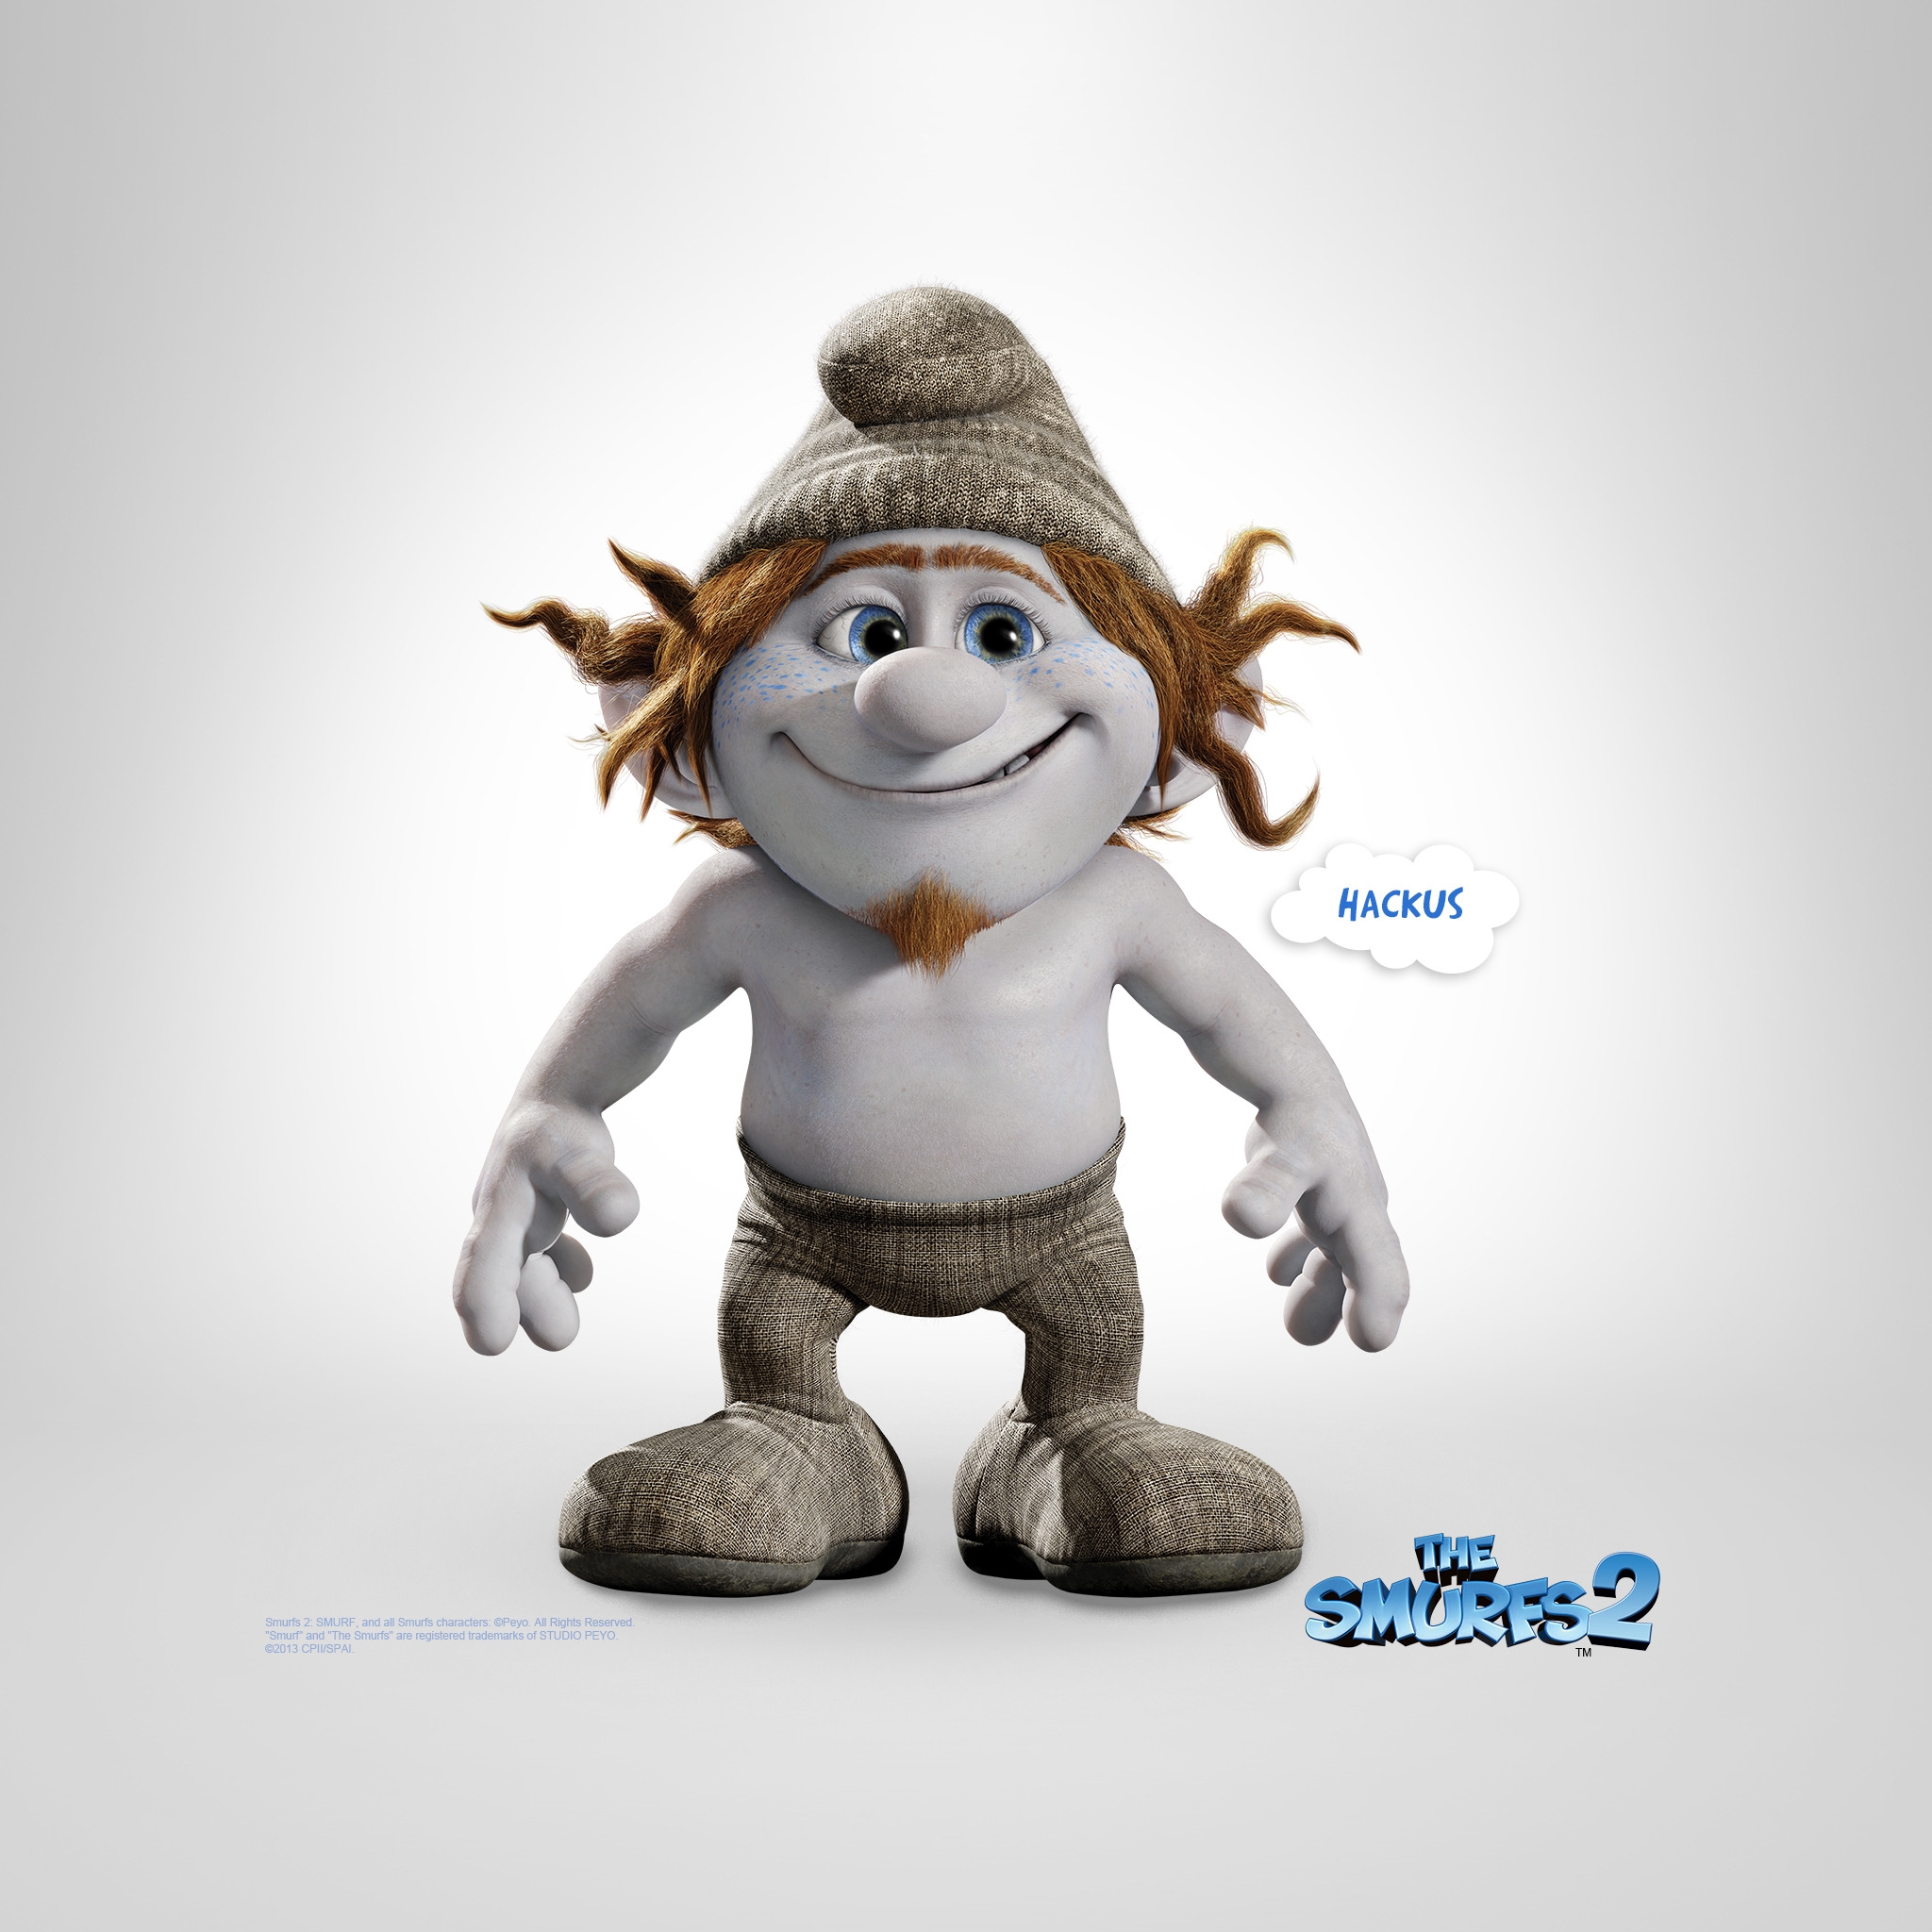 Hachus The Smurfs 2 for 2048 x 2048 New iPad resolution